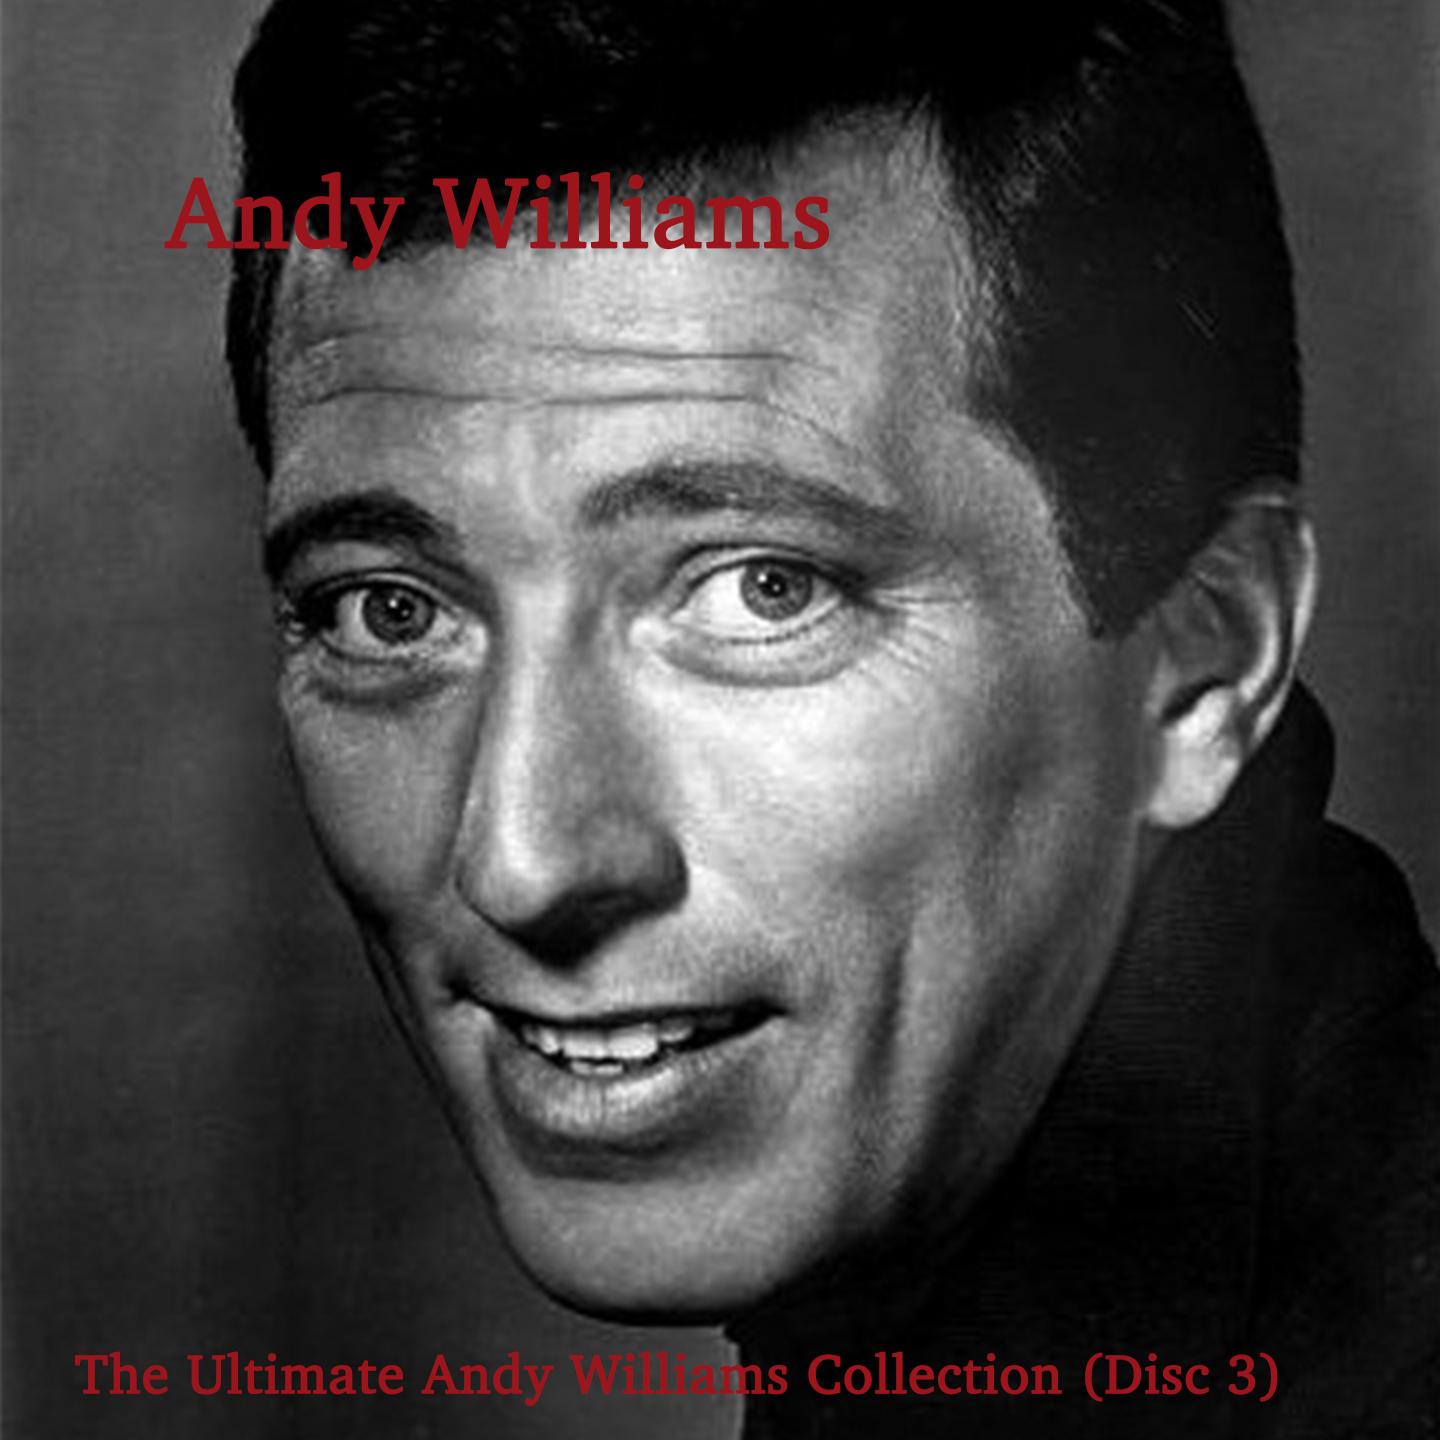 The Real... Andy Williams (The Ultimate Andy Williams Collection Disc 3)